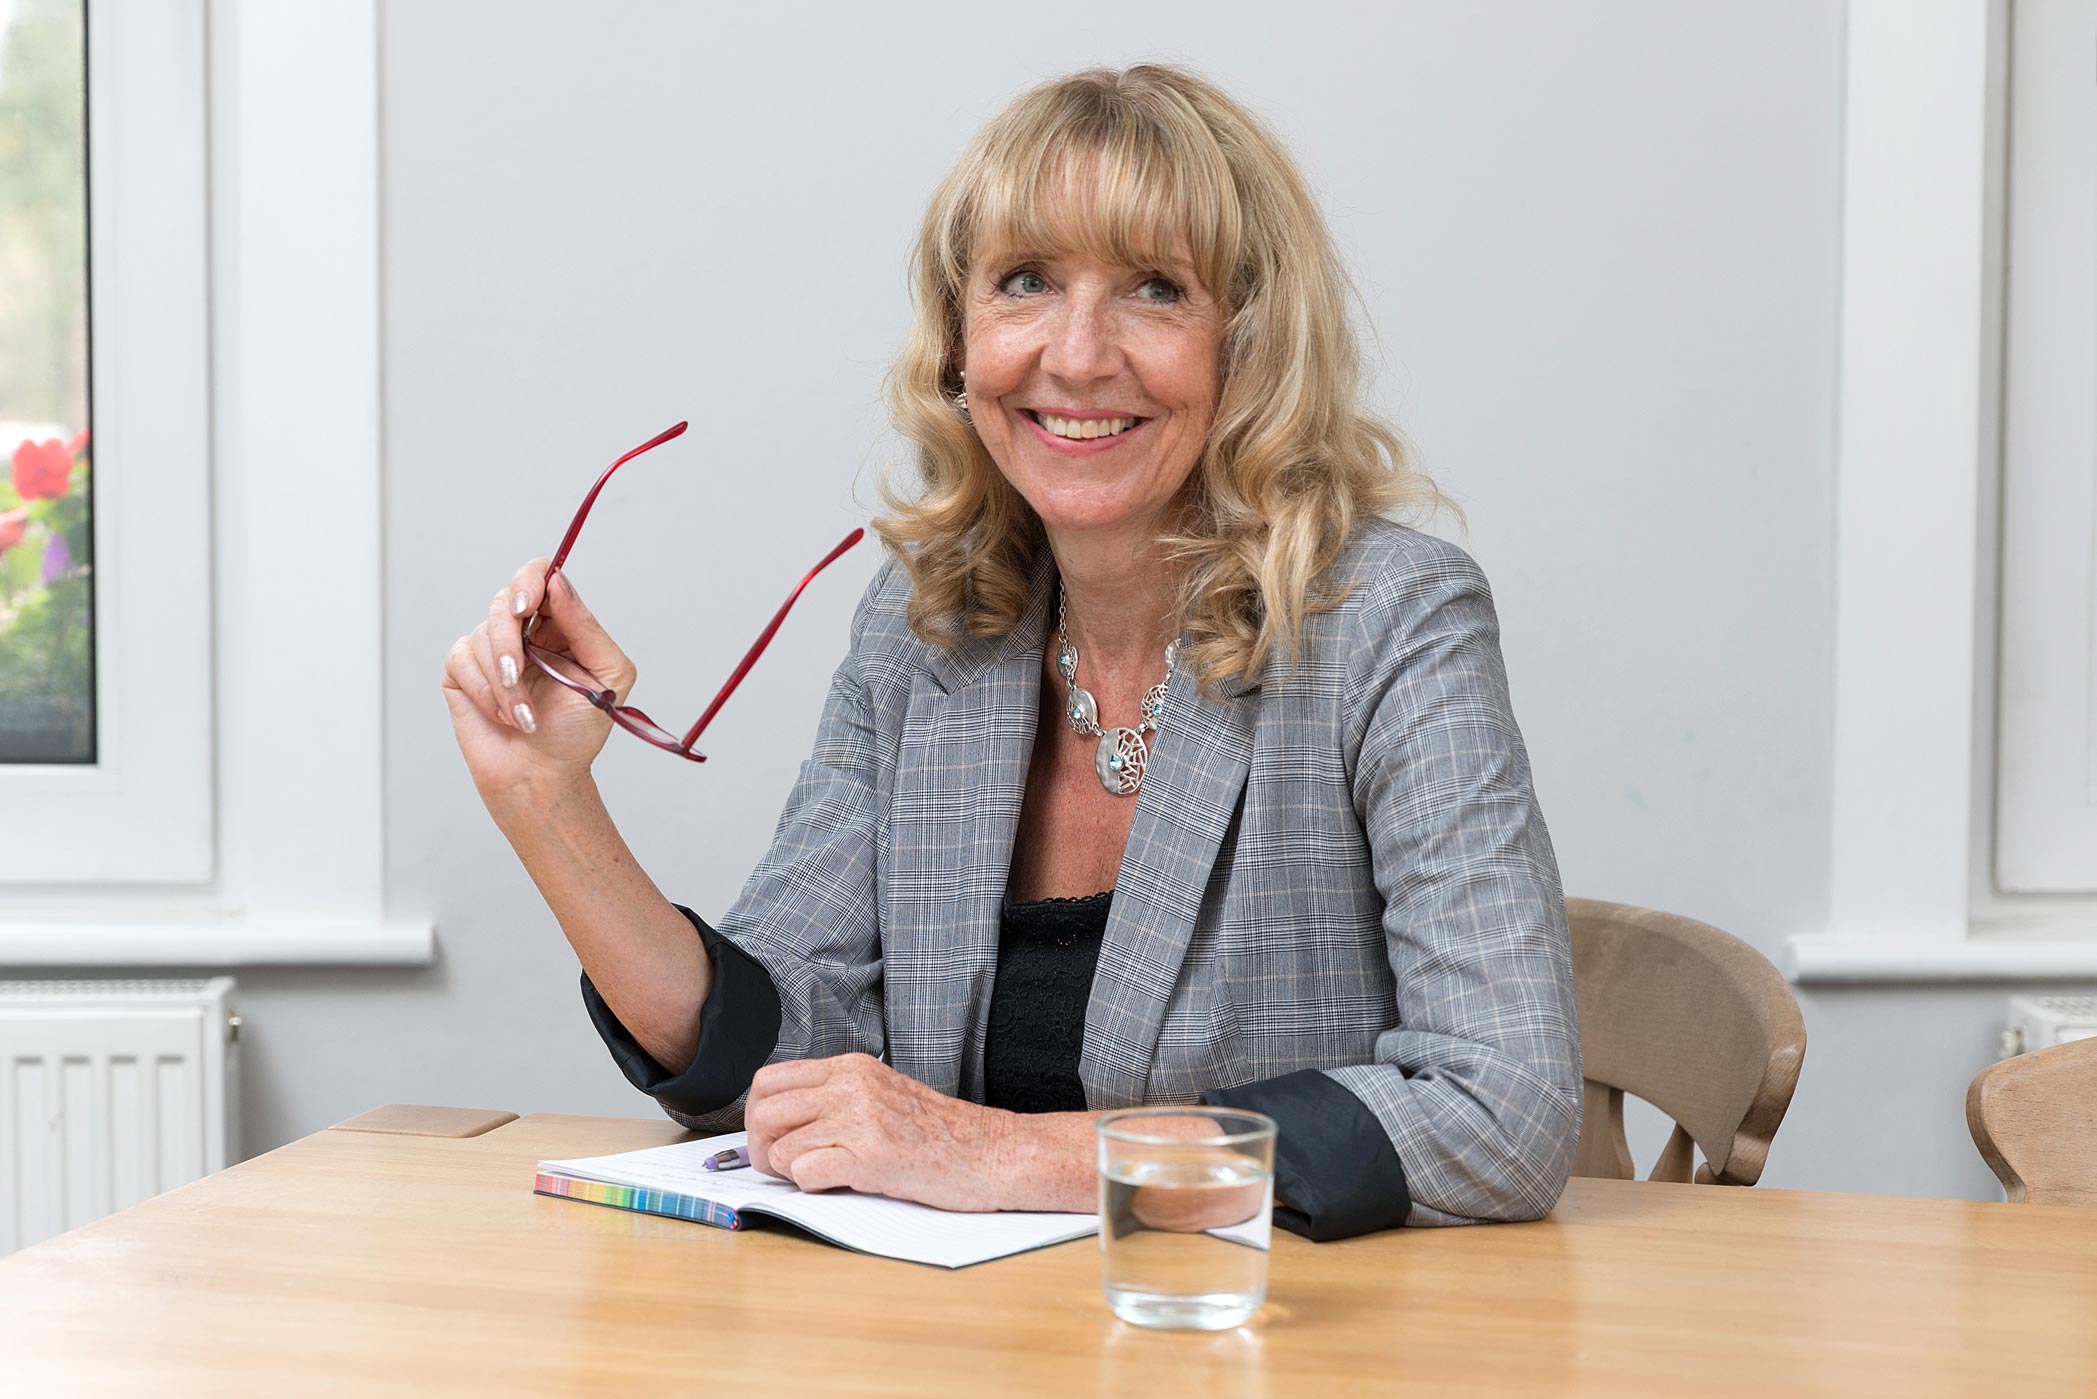 A business woman holds her glasses & smiles. Personal branding photography in Croydon, London & Surrey